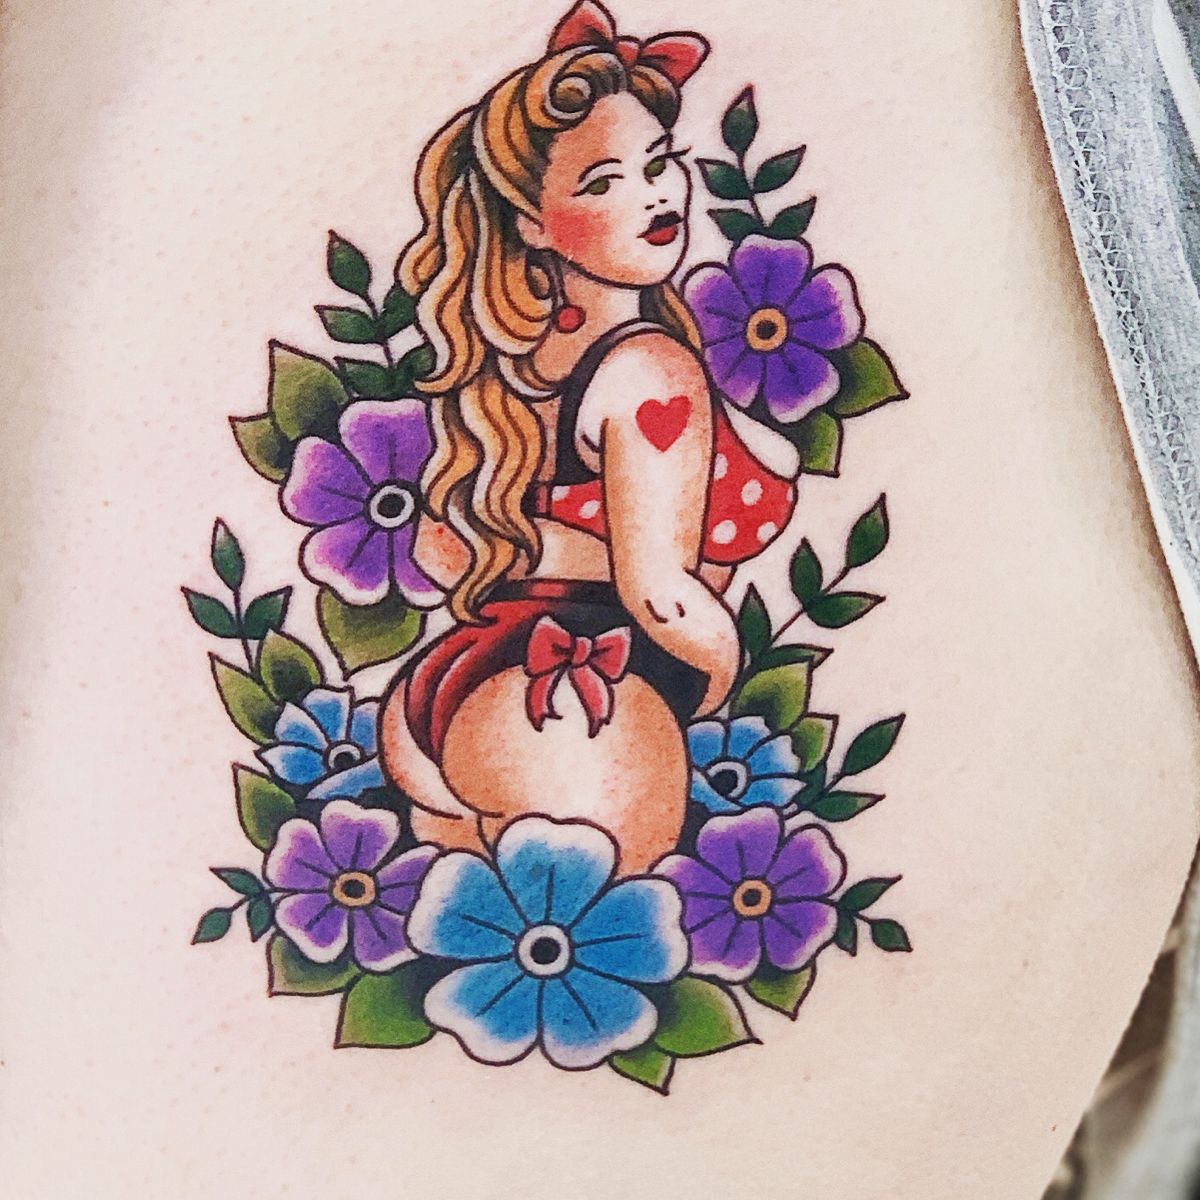 Best of Chubby pin up tattoo